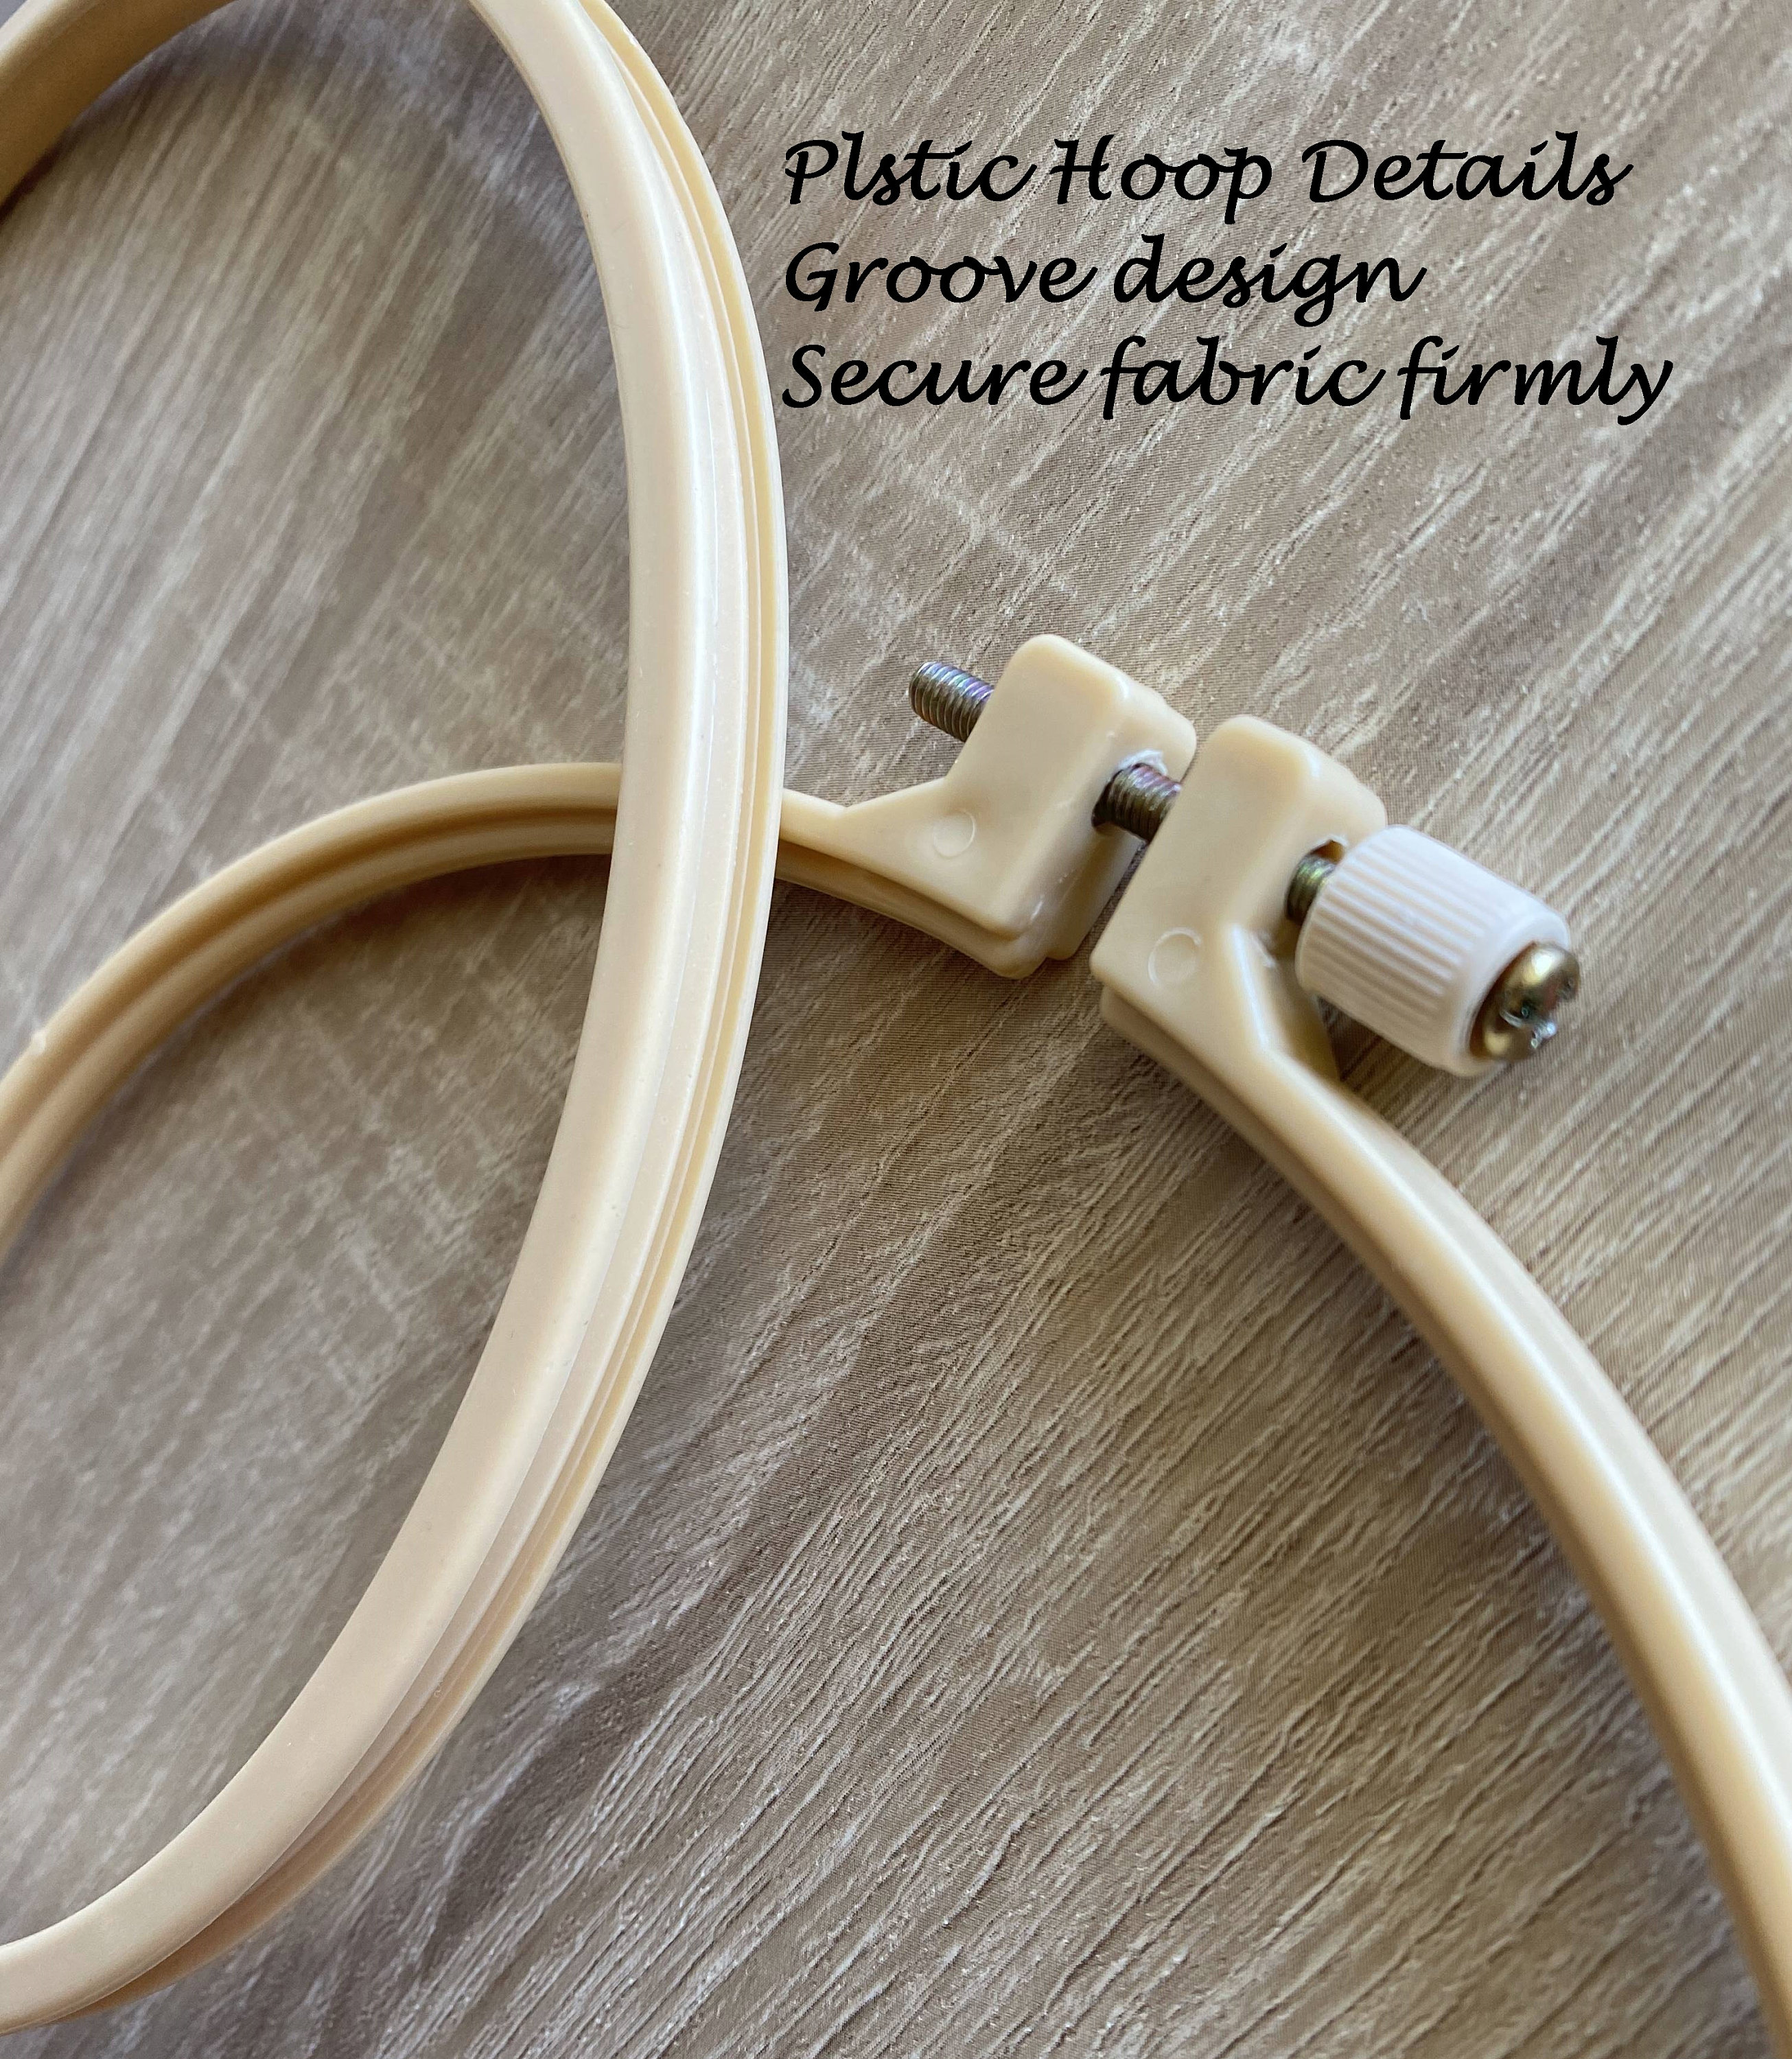 Plastic Embroidery Hoops 6, 8, Neutral Colors Embroidery Hoops With Tight  Grip, Cross Stitch Hoops 